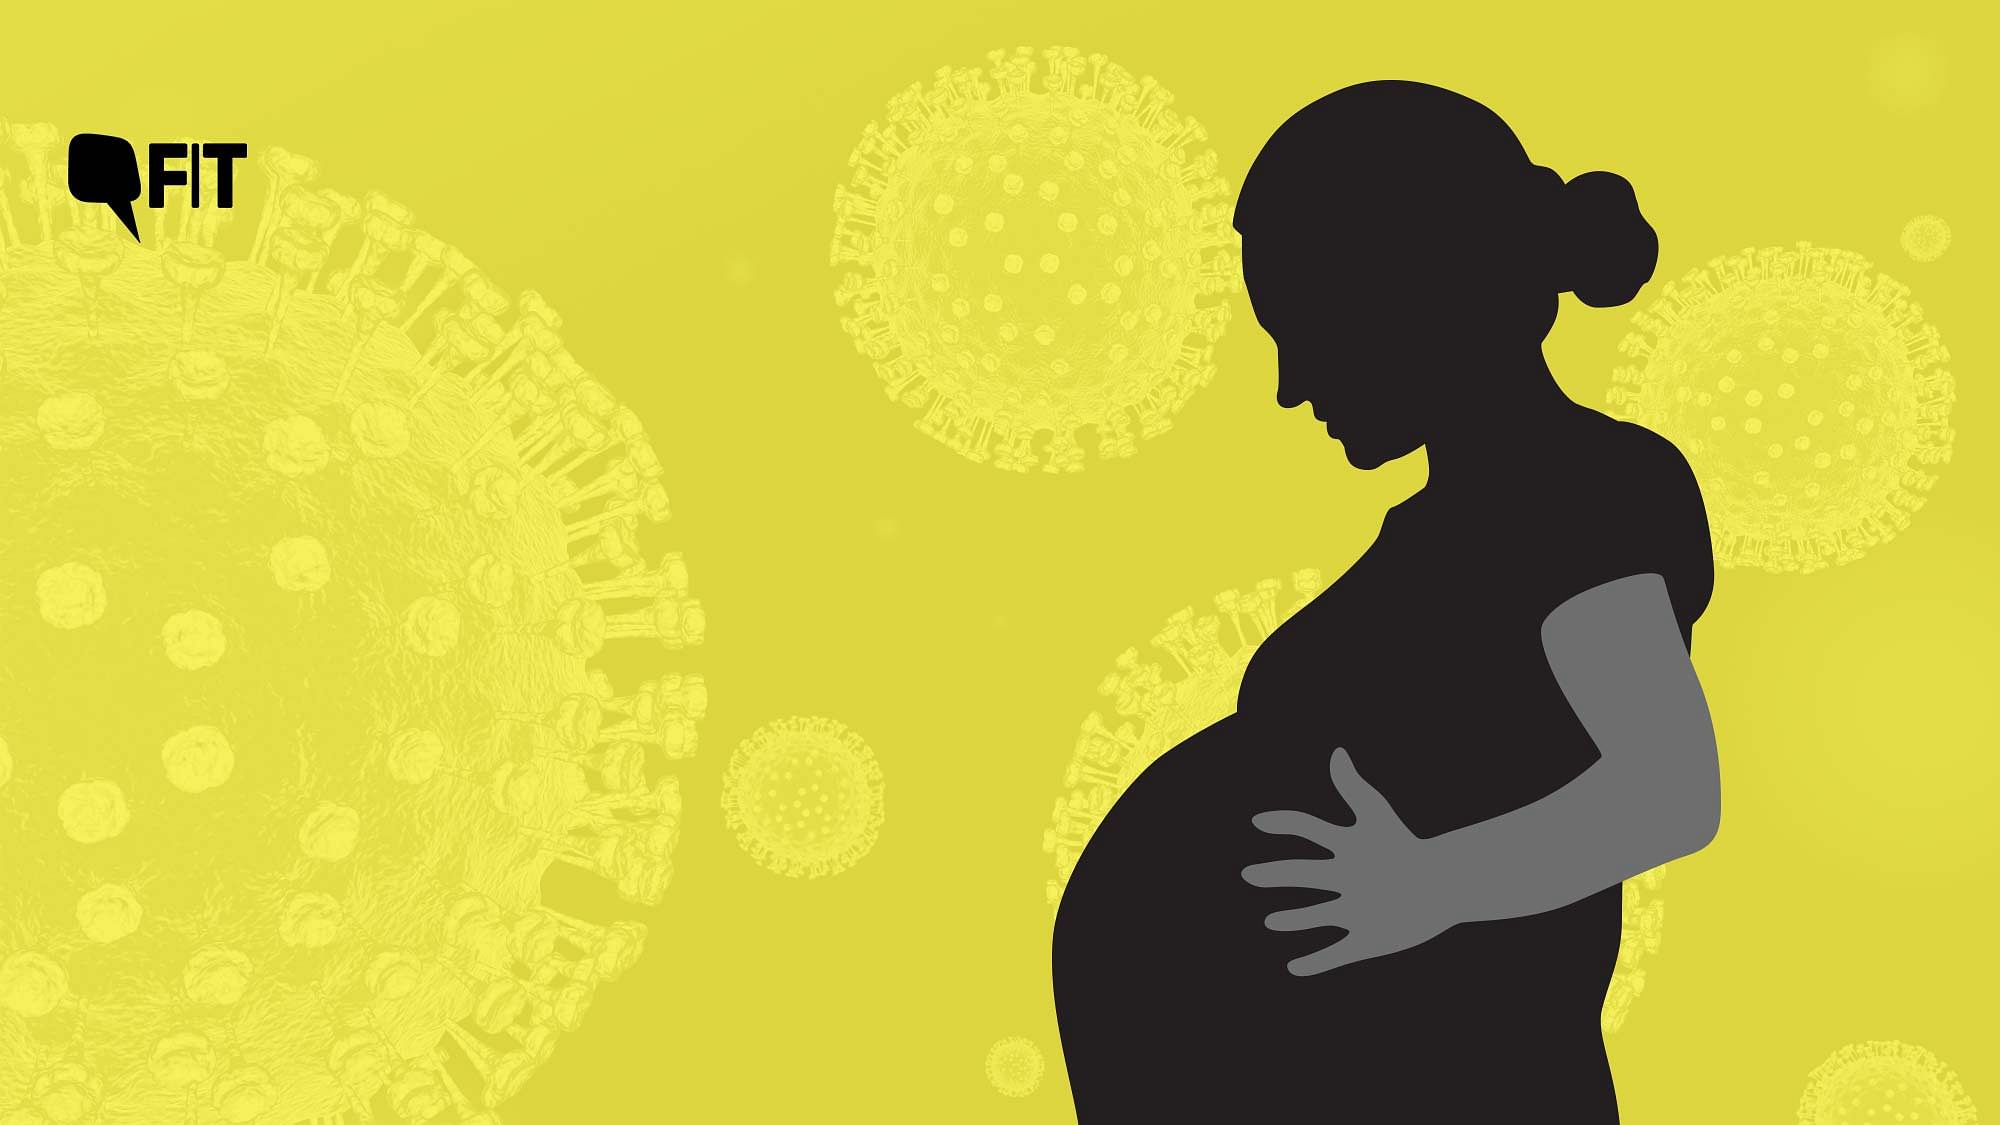 Are pregnant women at a higher risk of contracting coronavirus?